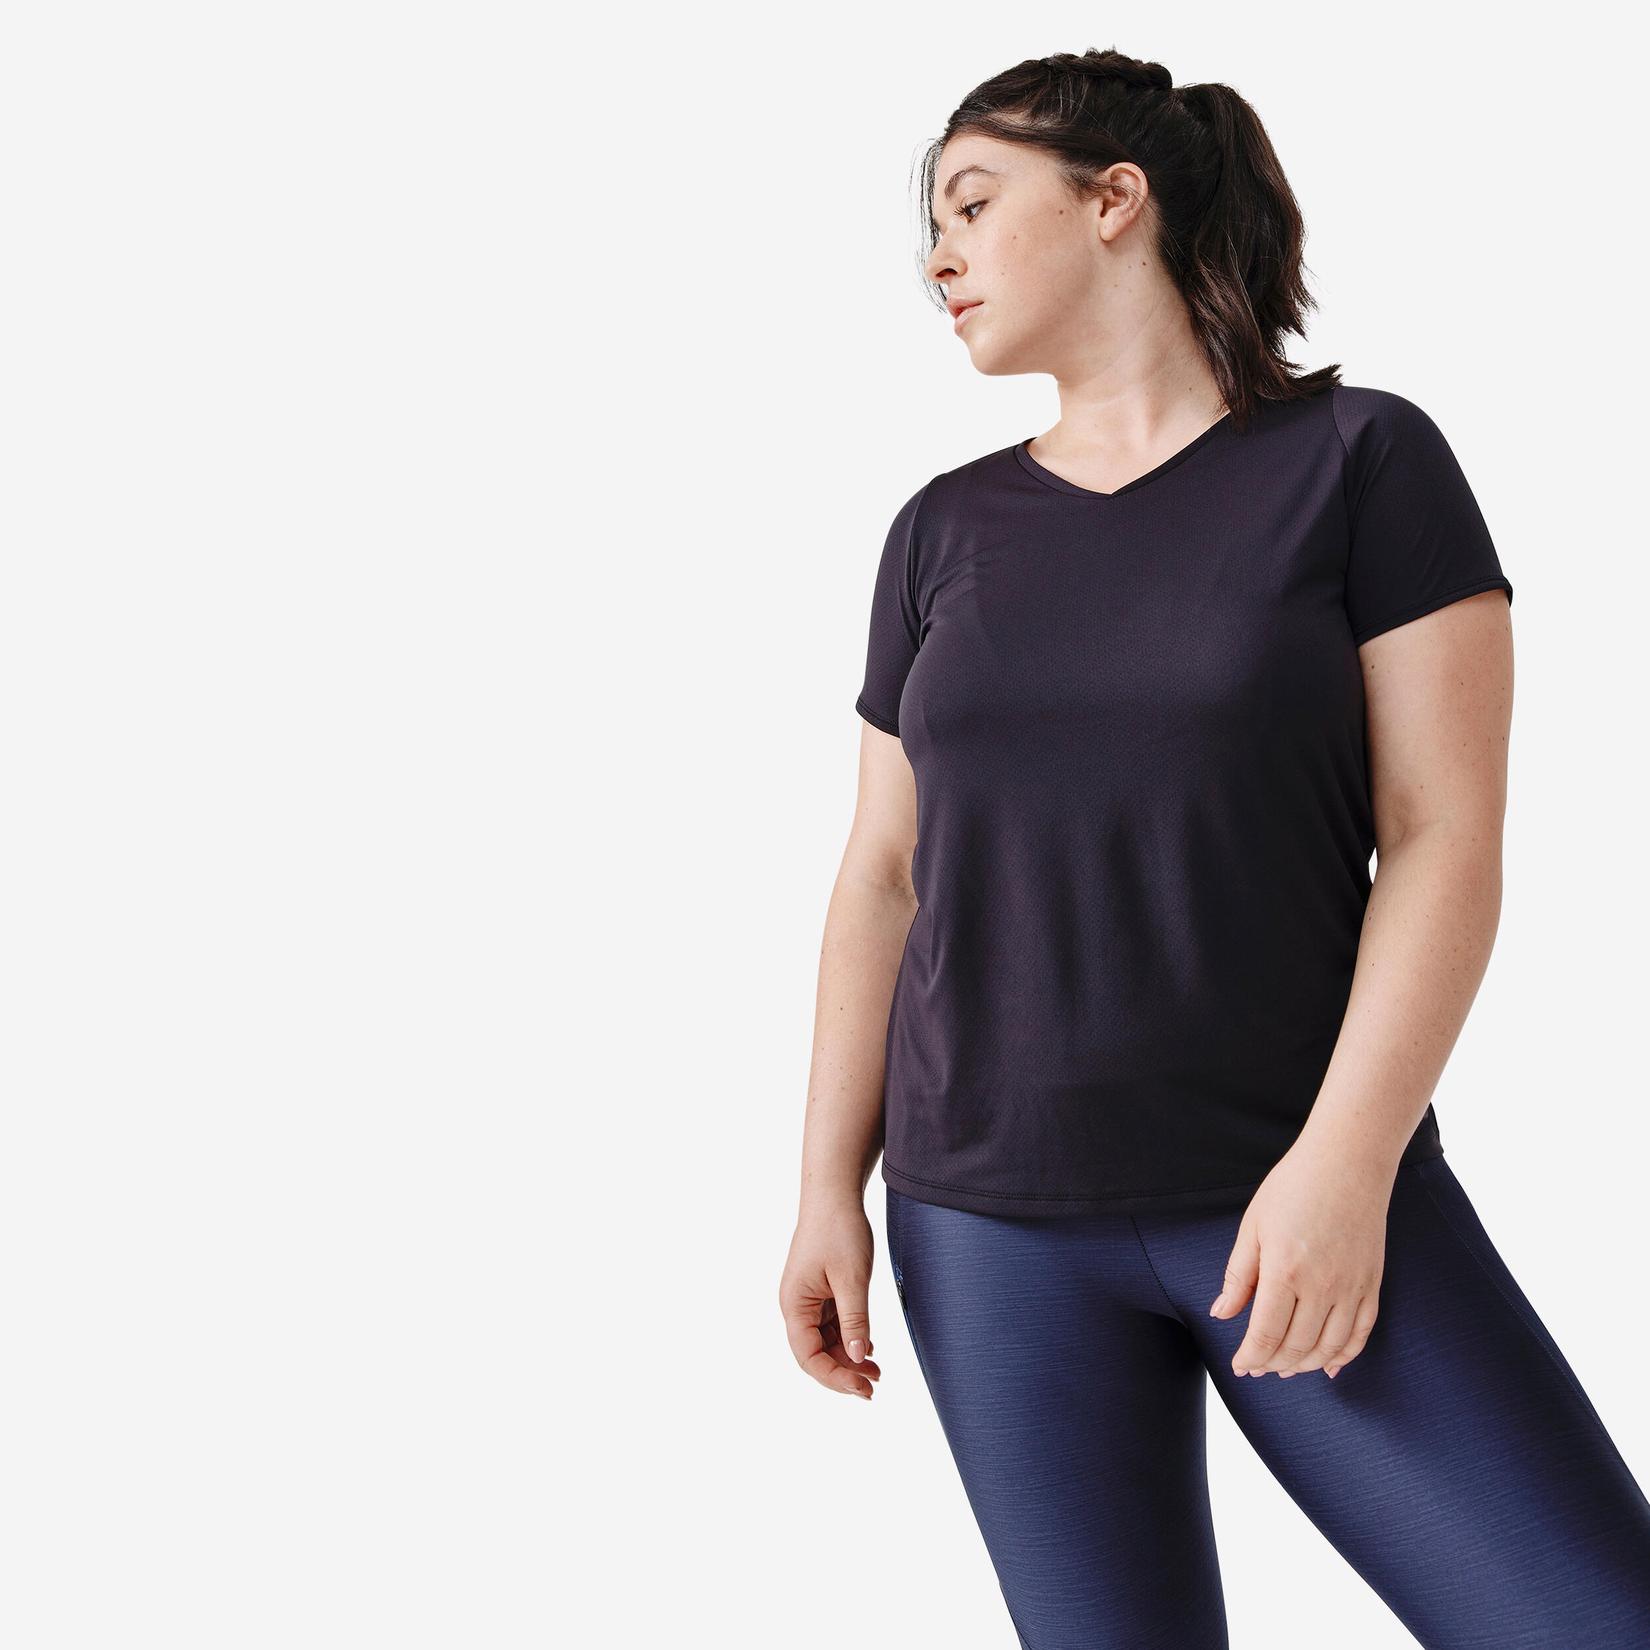 Women's Quick Dry Running T-Shirt - Black offers at S$ 6.9 in Decathlon